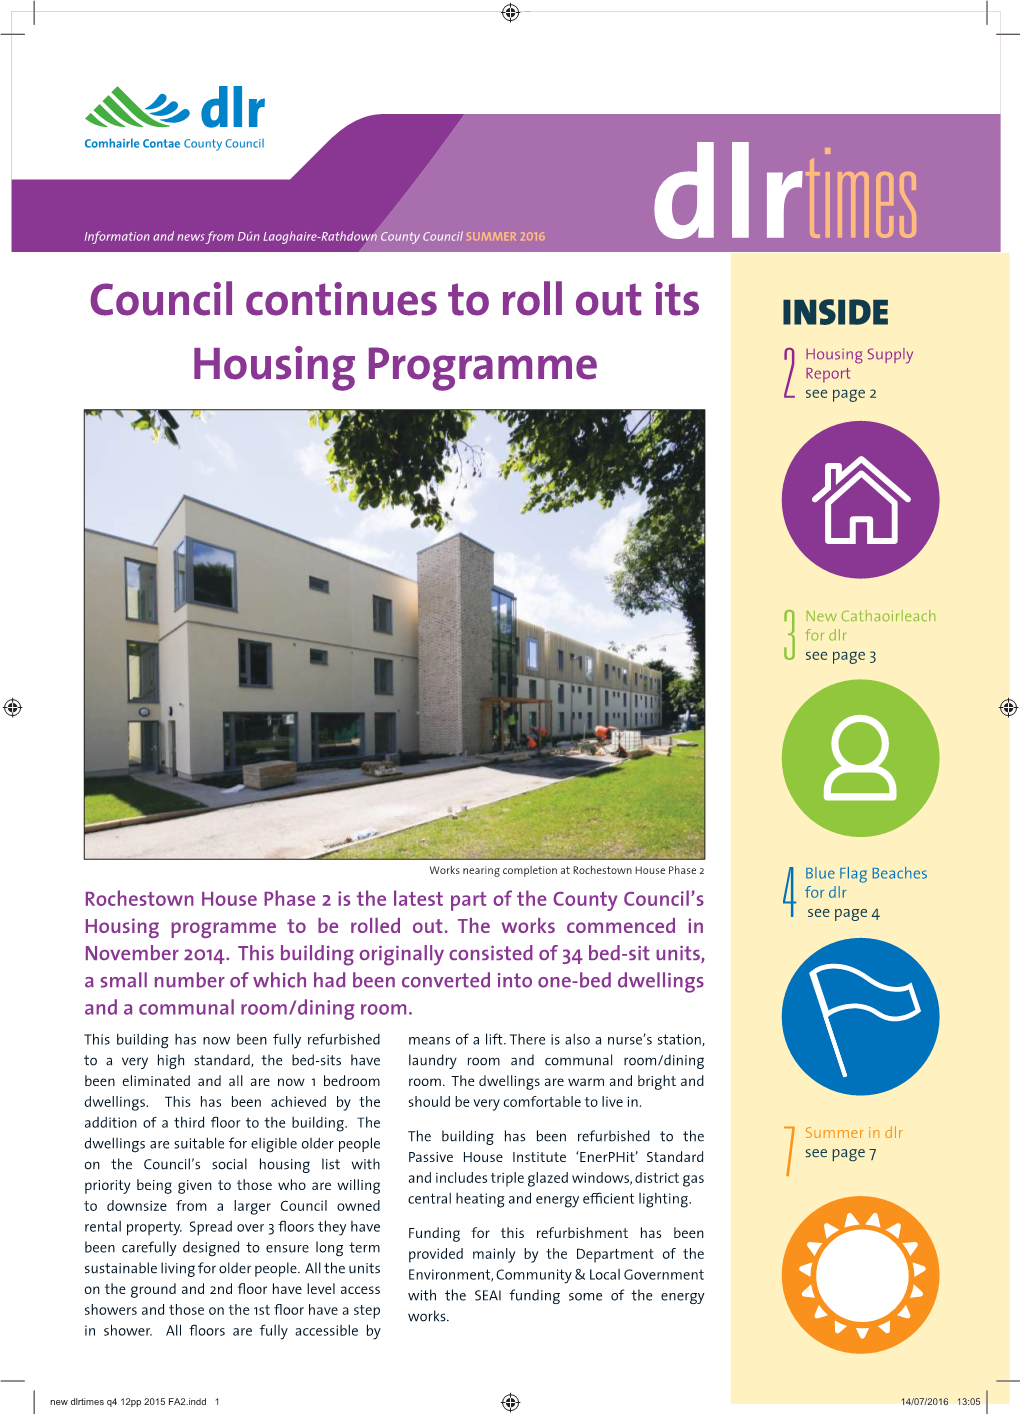 Dlrtimes Council Continues to Roll out Its INSIDE Housing Supply Report Housing Programme 2 See Page 2